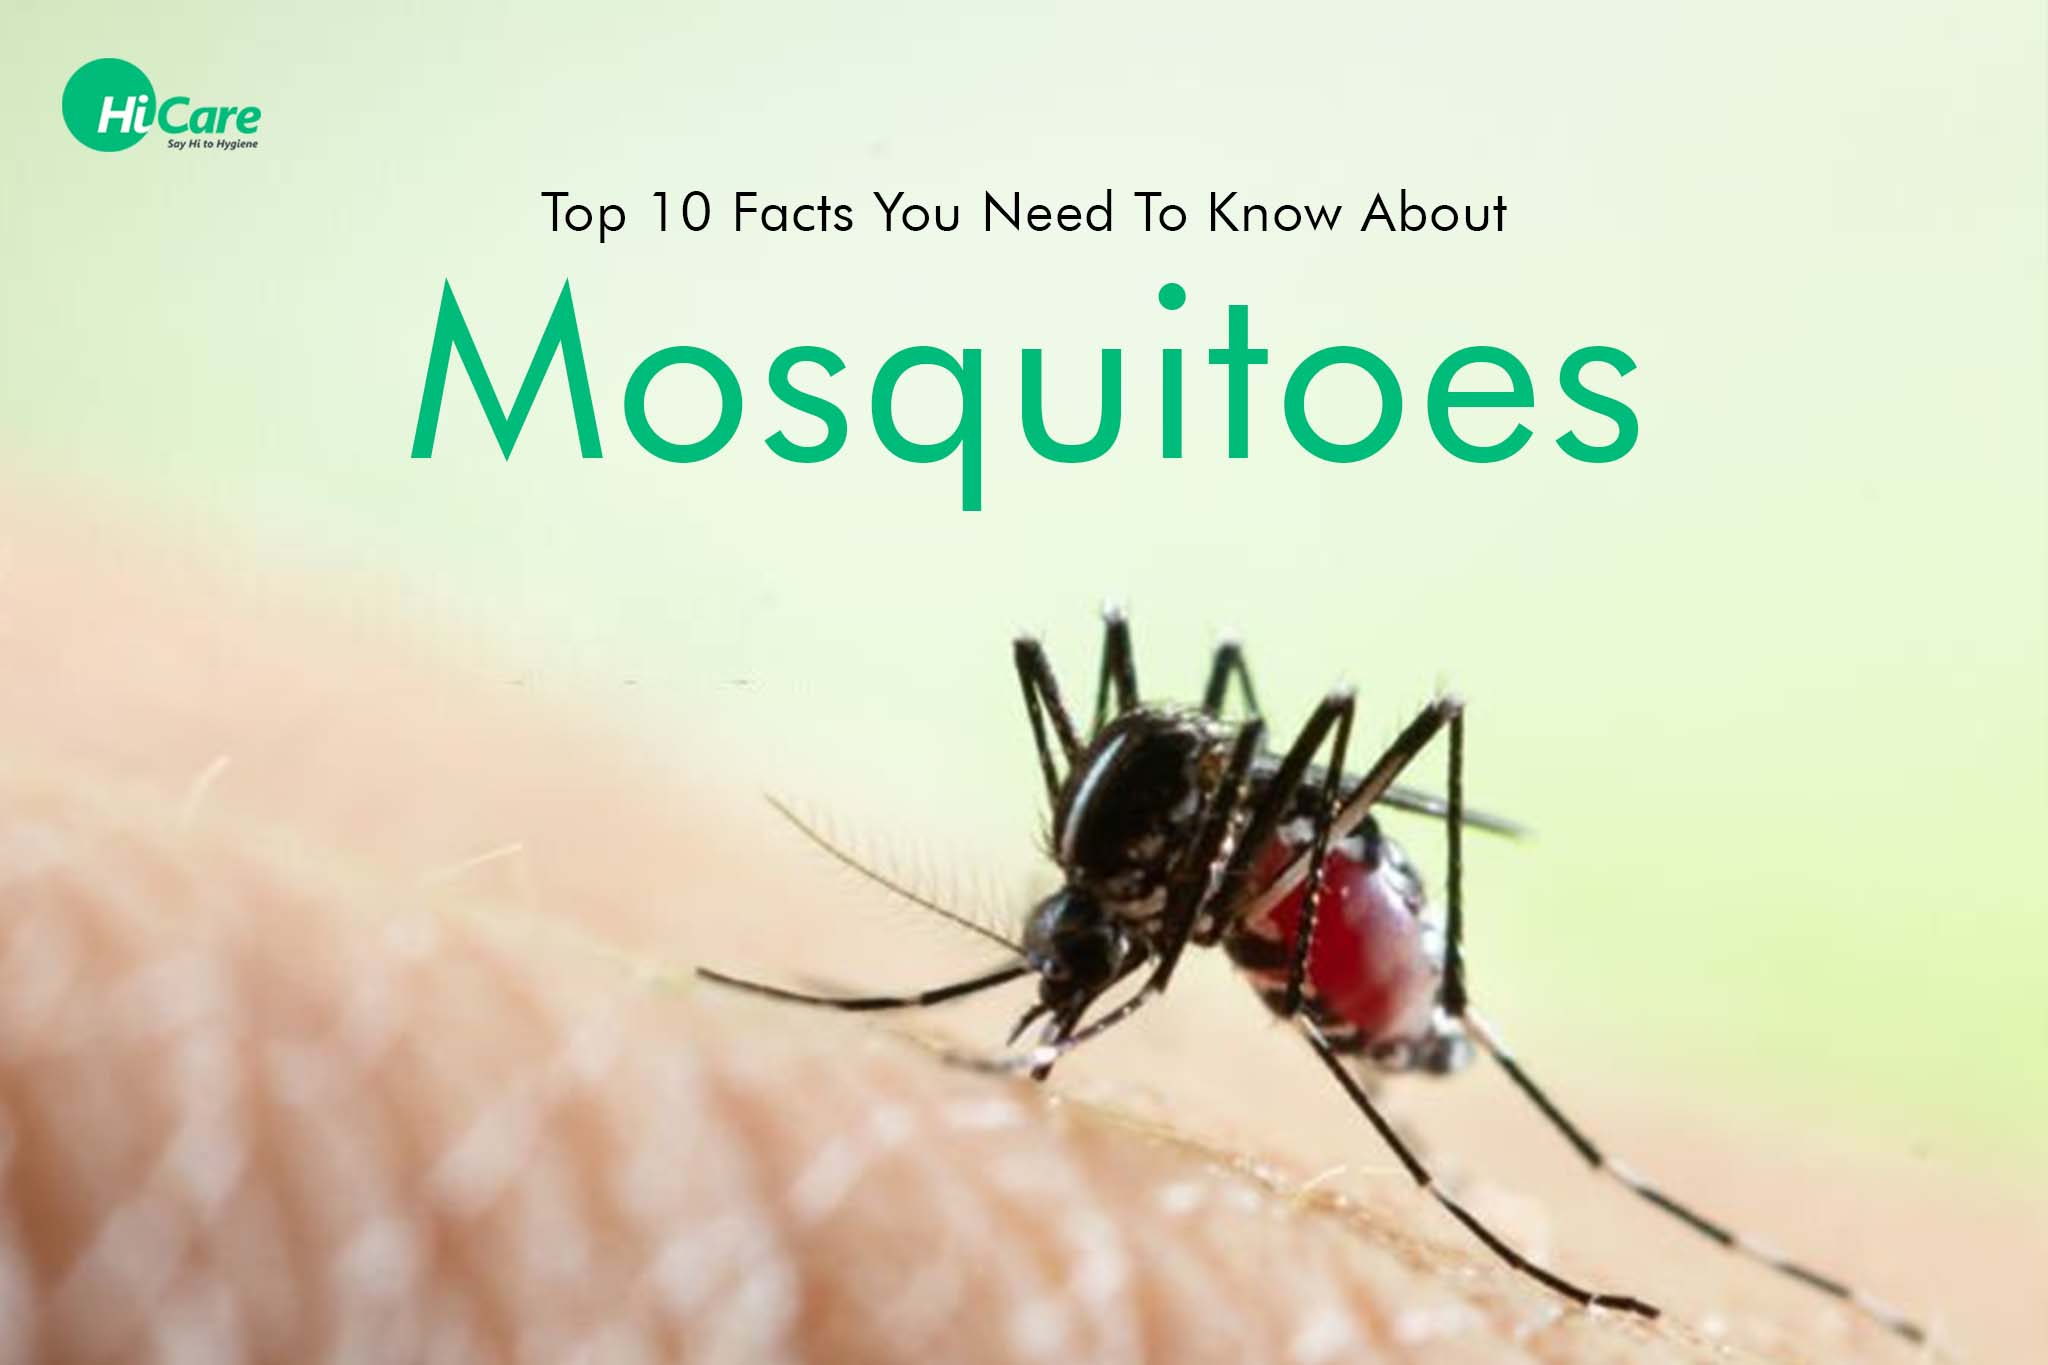 Top 10 Facts You Need To Know About Mosquitoes